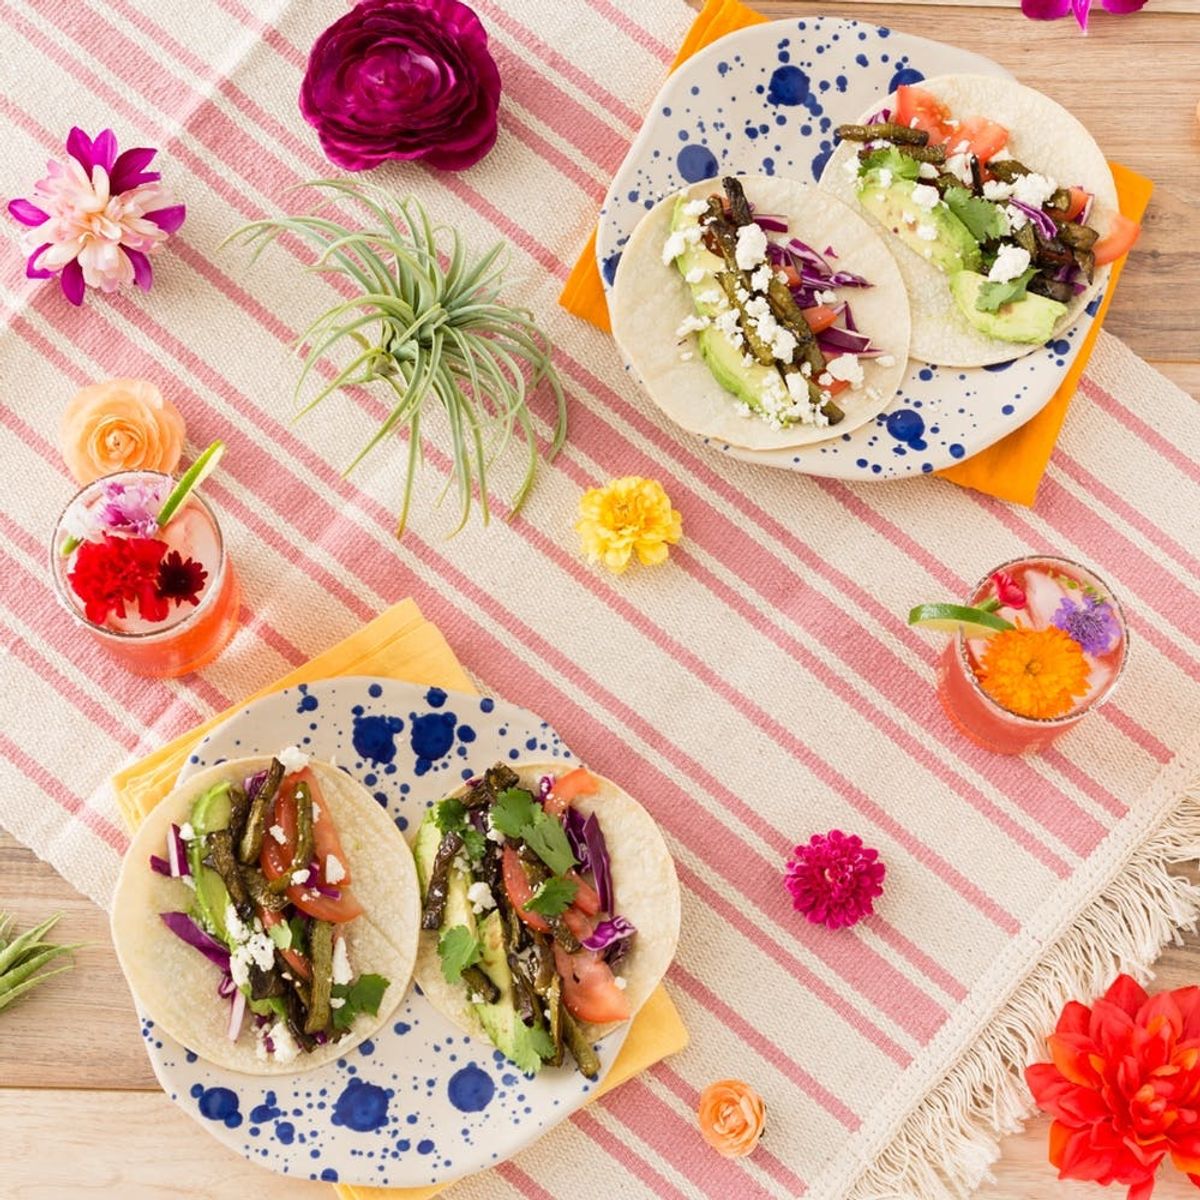 Celebrate Sunny Days With Prickly Pear Margaritas + Cactus Tacos